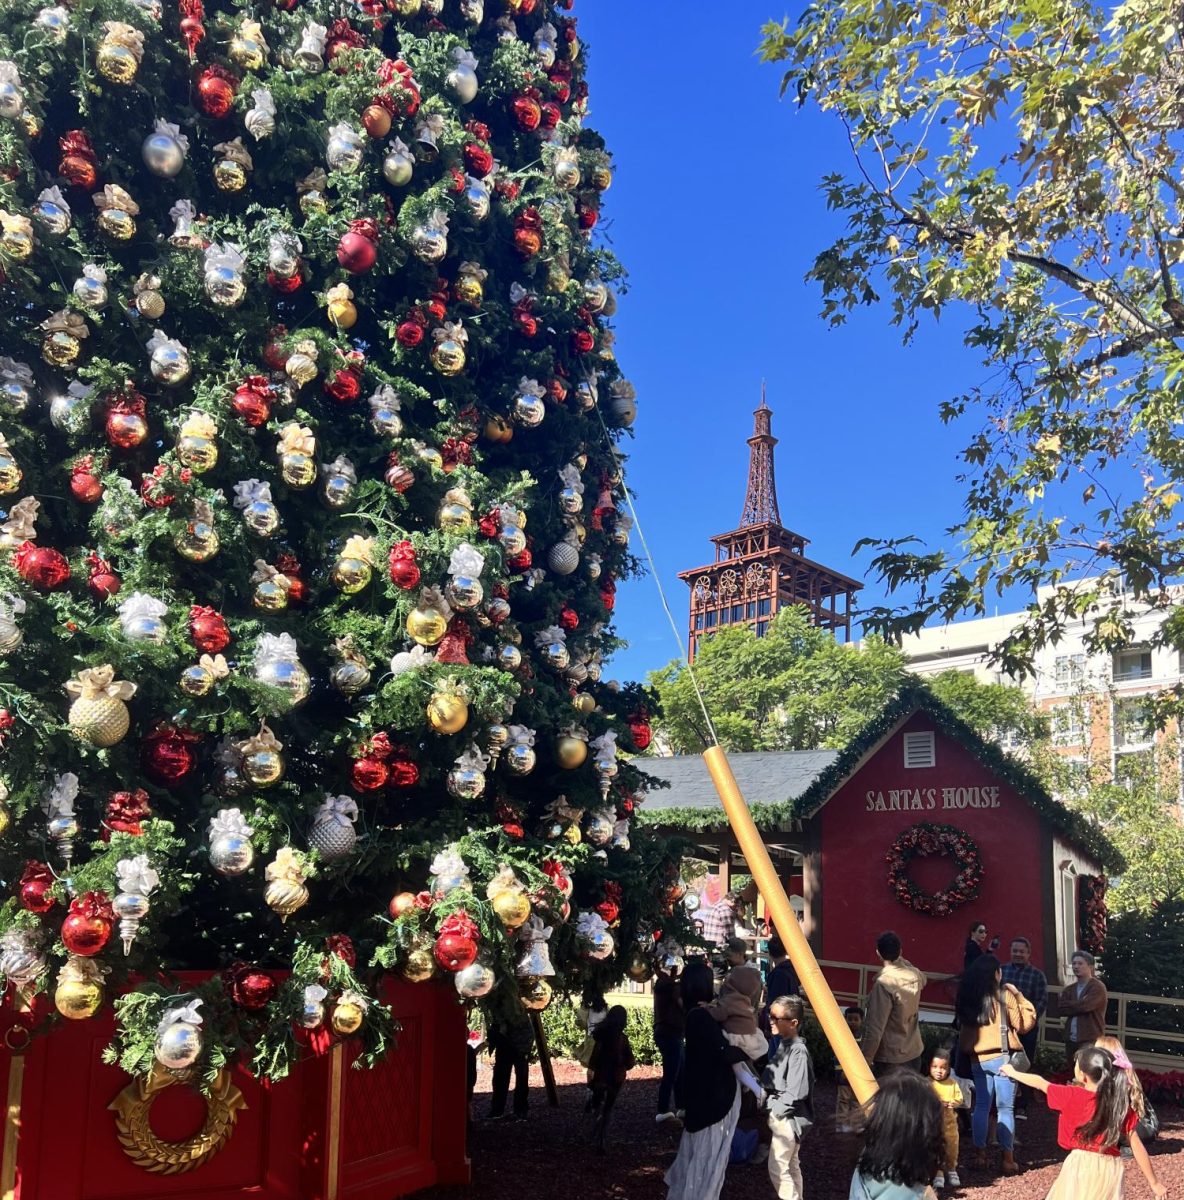 People surround this giant Christmas tree in joy of the upcoming Christmas season